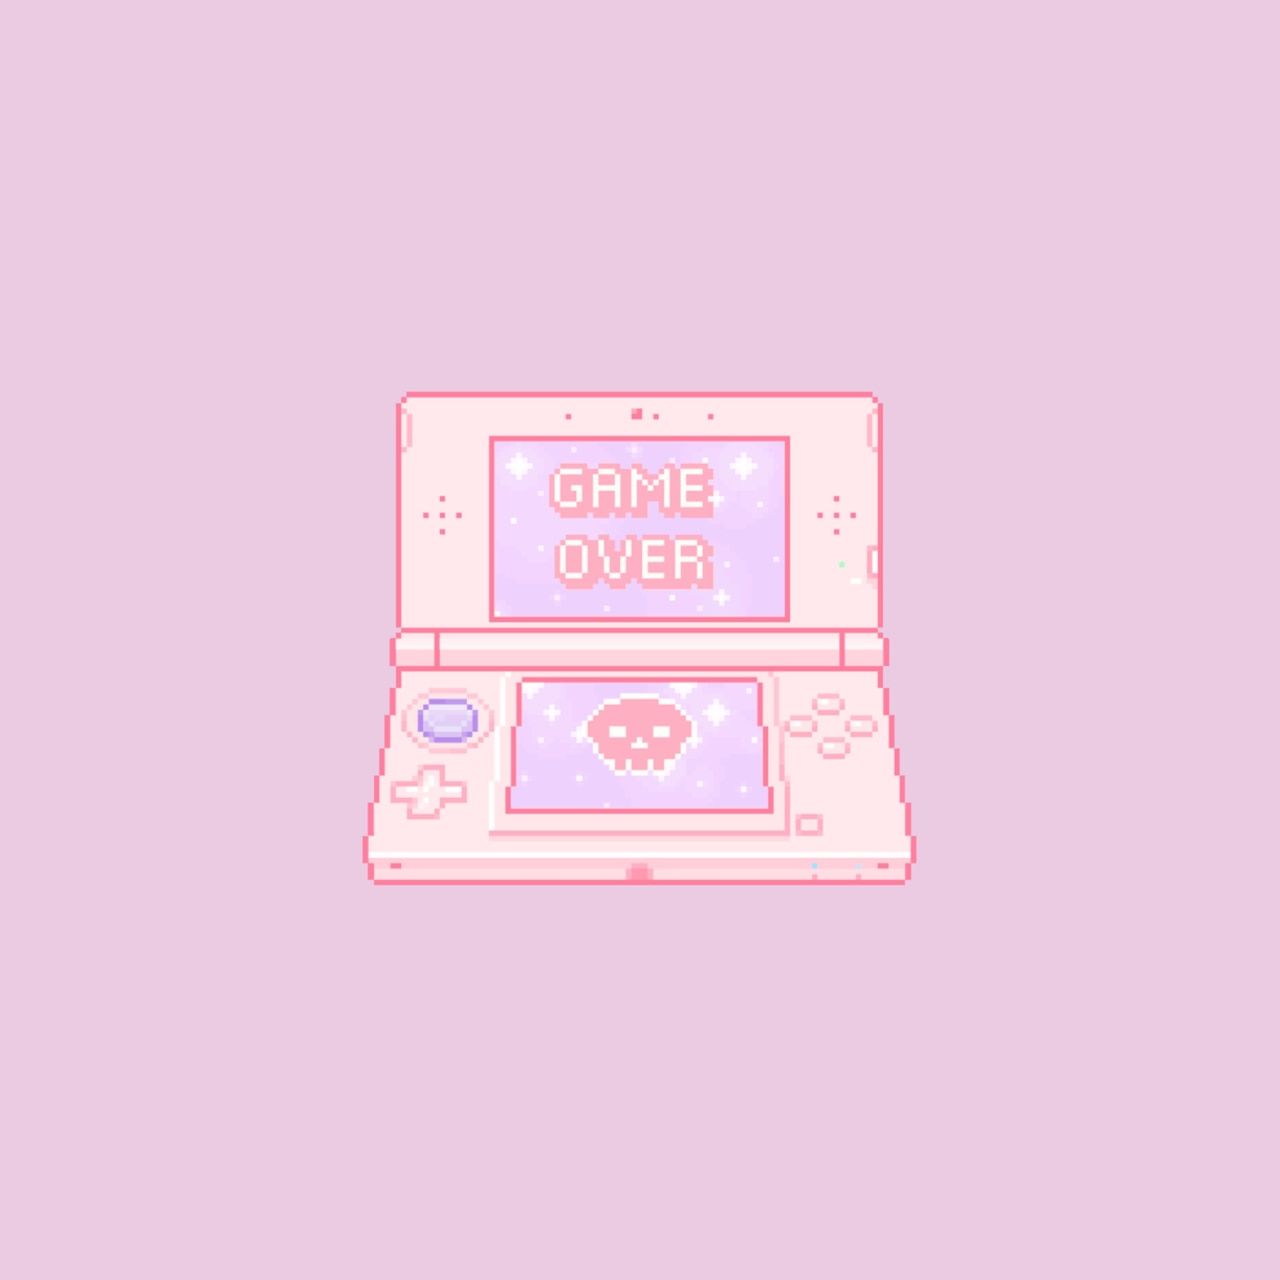 Gamer Girl Wallpapers For Computers